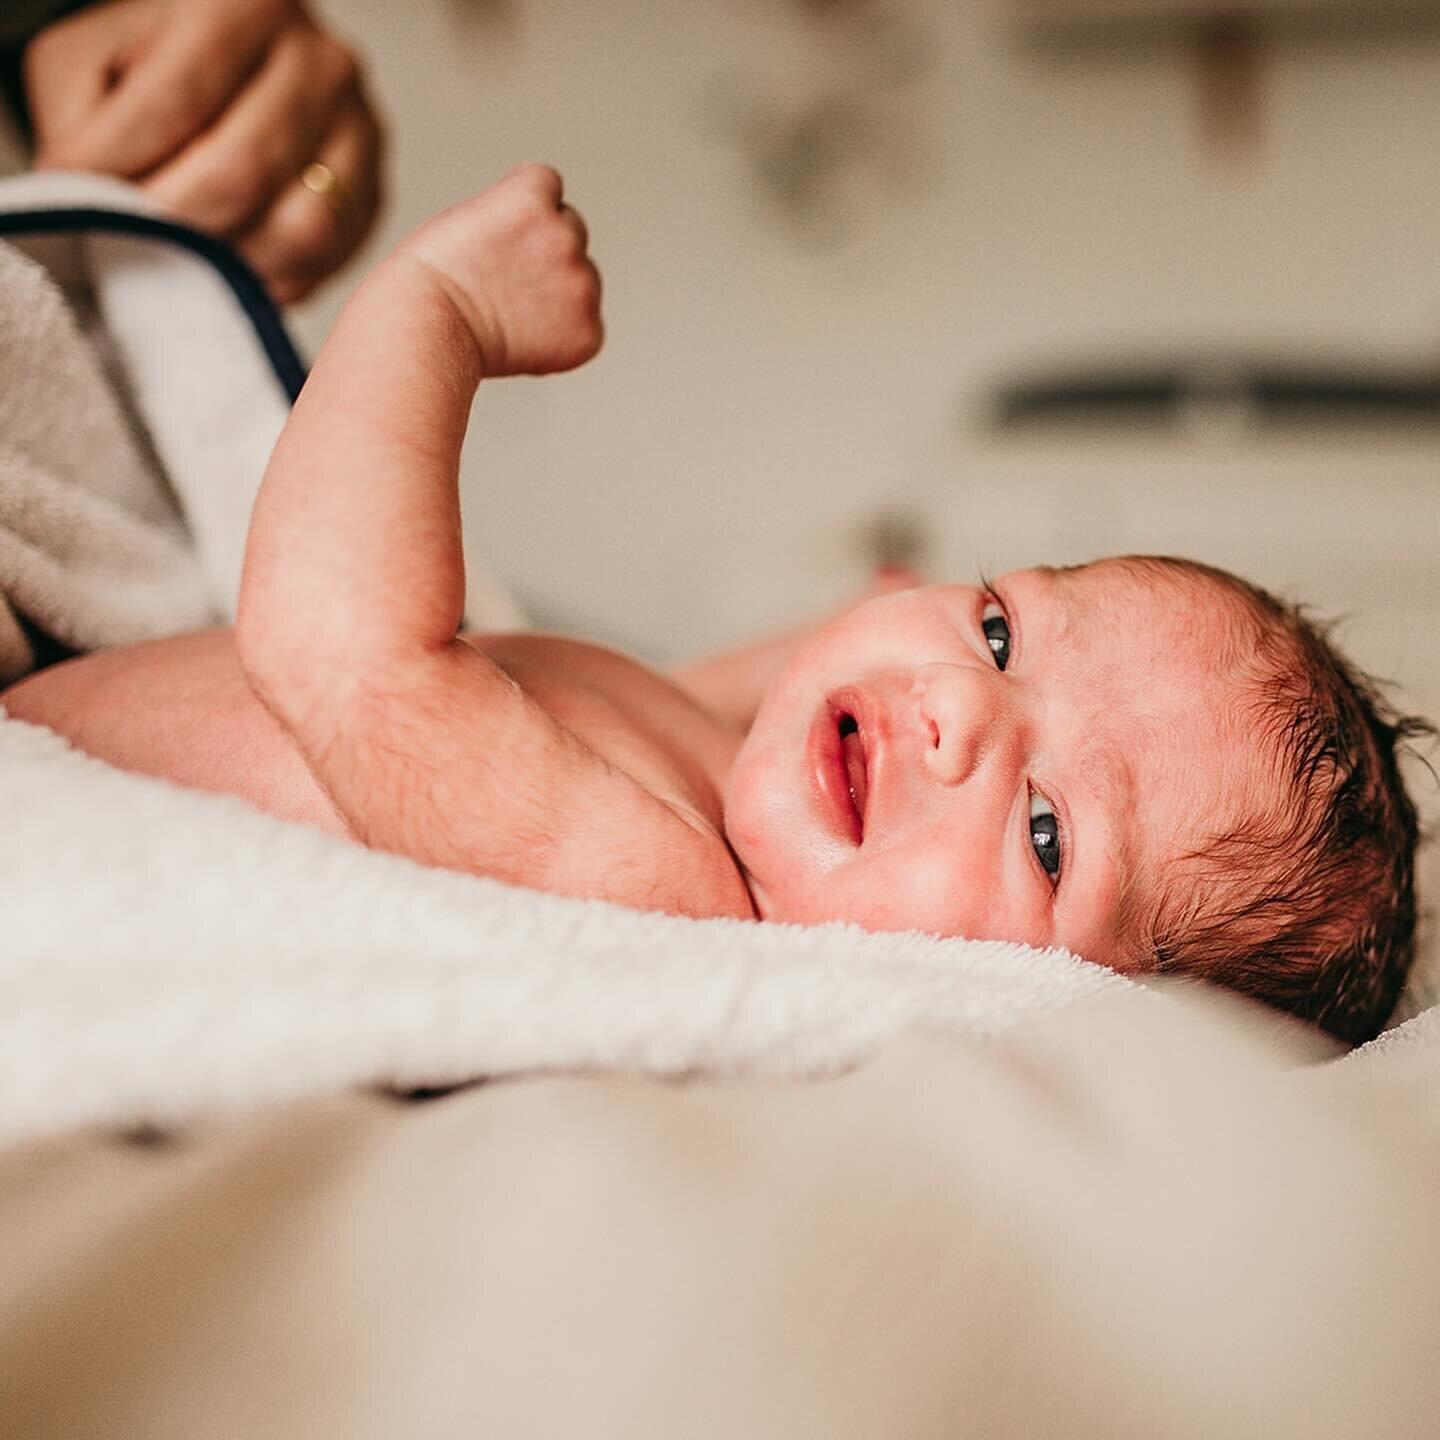 Hey there, moms and dads, there are truly some moments in life you don&rsquo;t want to let slip by&mdash;the tender threads of connection and the pure happiness that emanates from your new bundle of joy. 
From the very first human touch to the sweet 